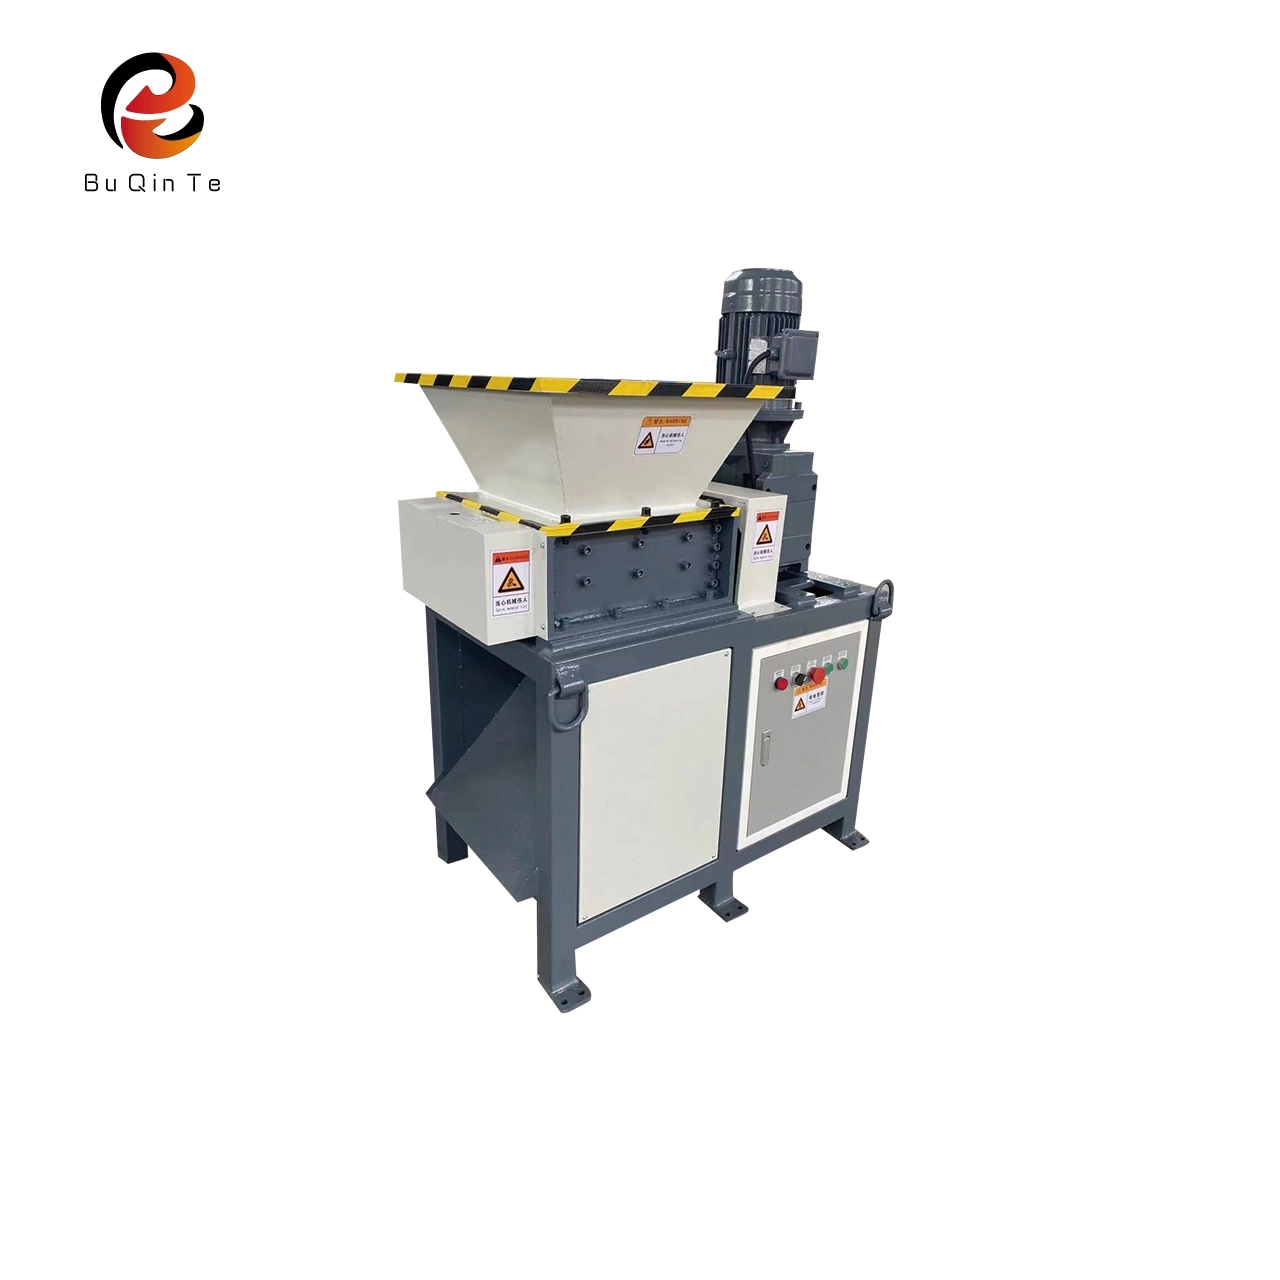 Simple Laboratory Shredders Are Popular Products